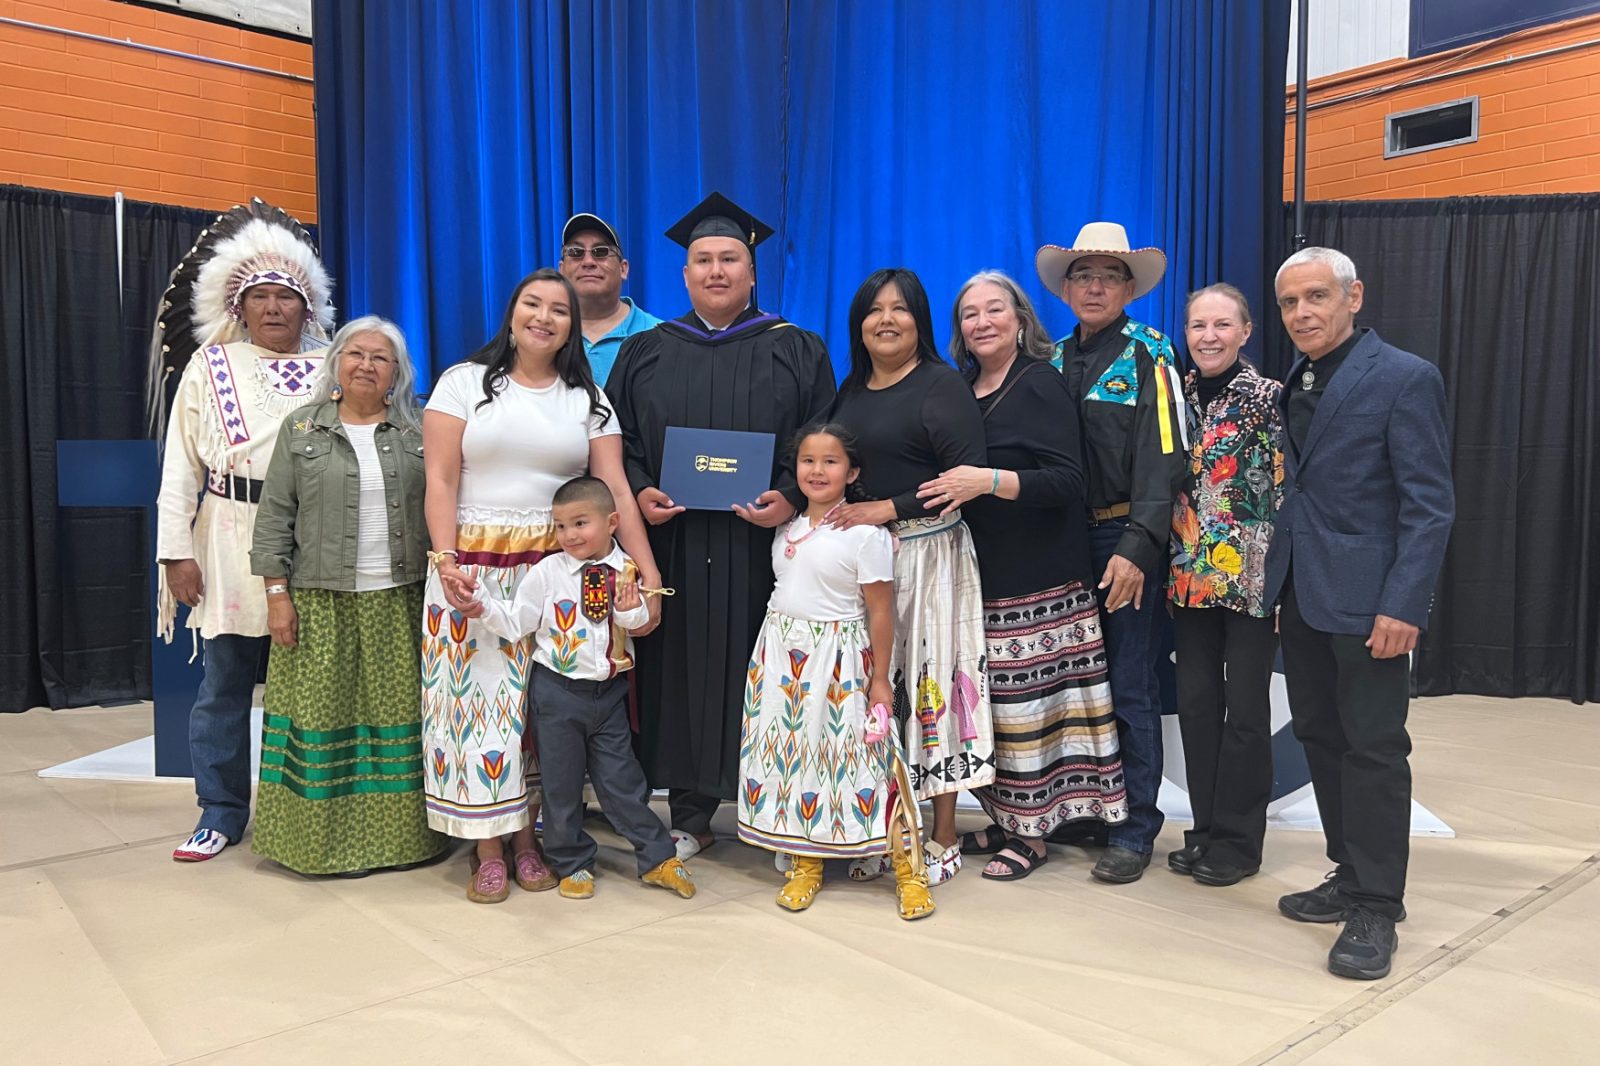 TRU Law alum Darnel Tailfeathers (centre) with family members at convocation in June 2022.